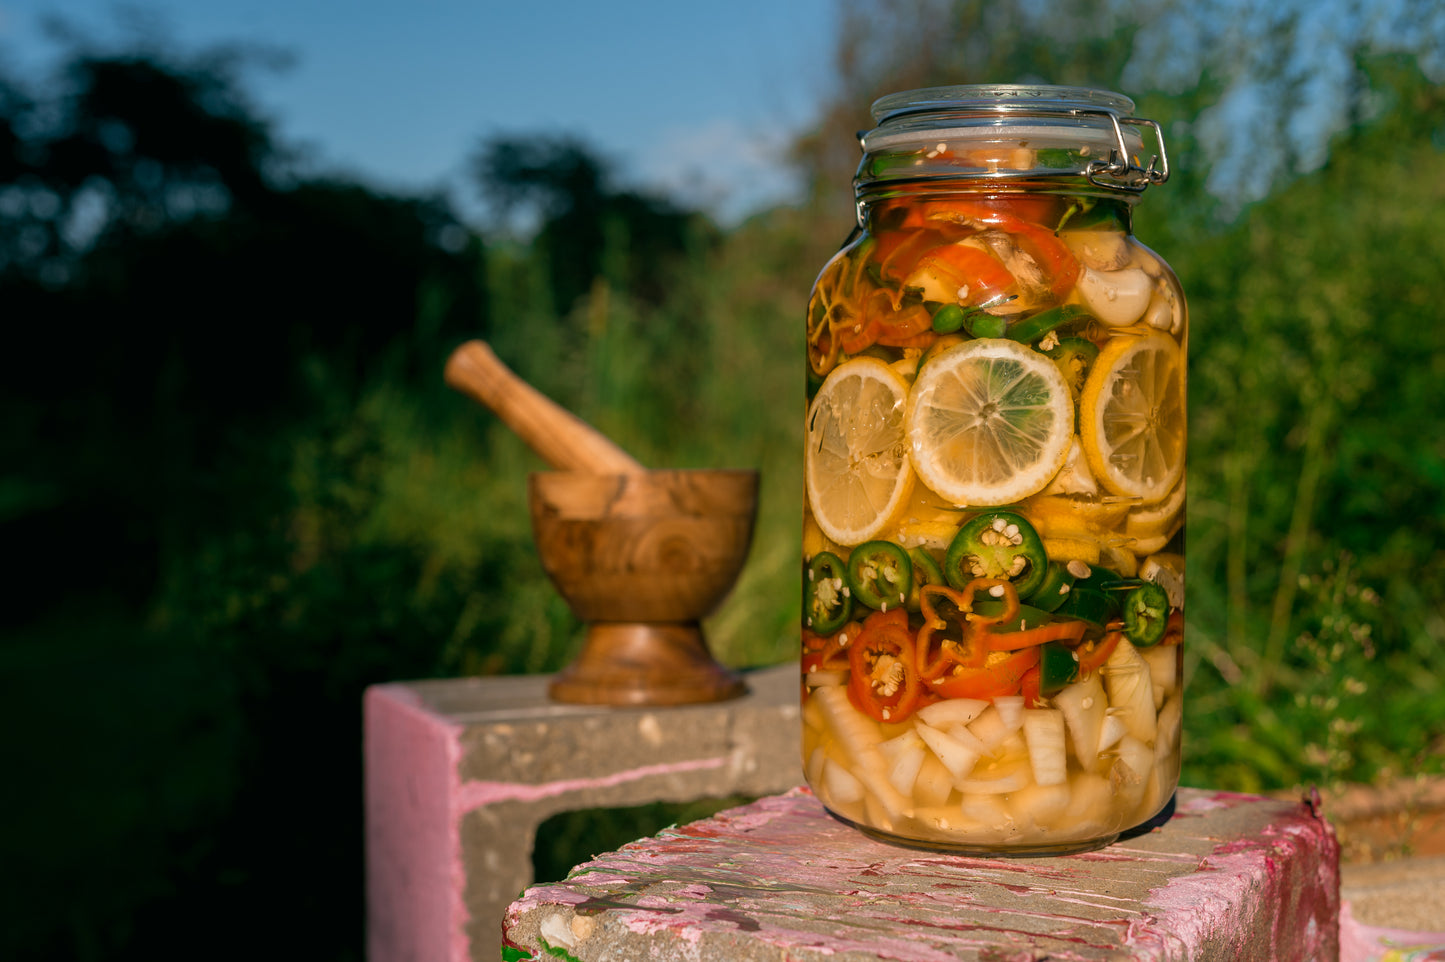 fire cider (superfood infused daily wellness tonic)